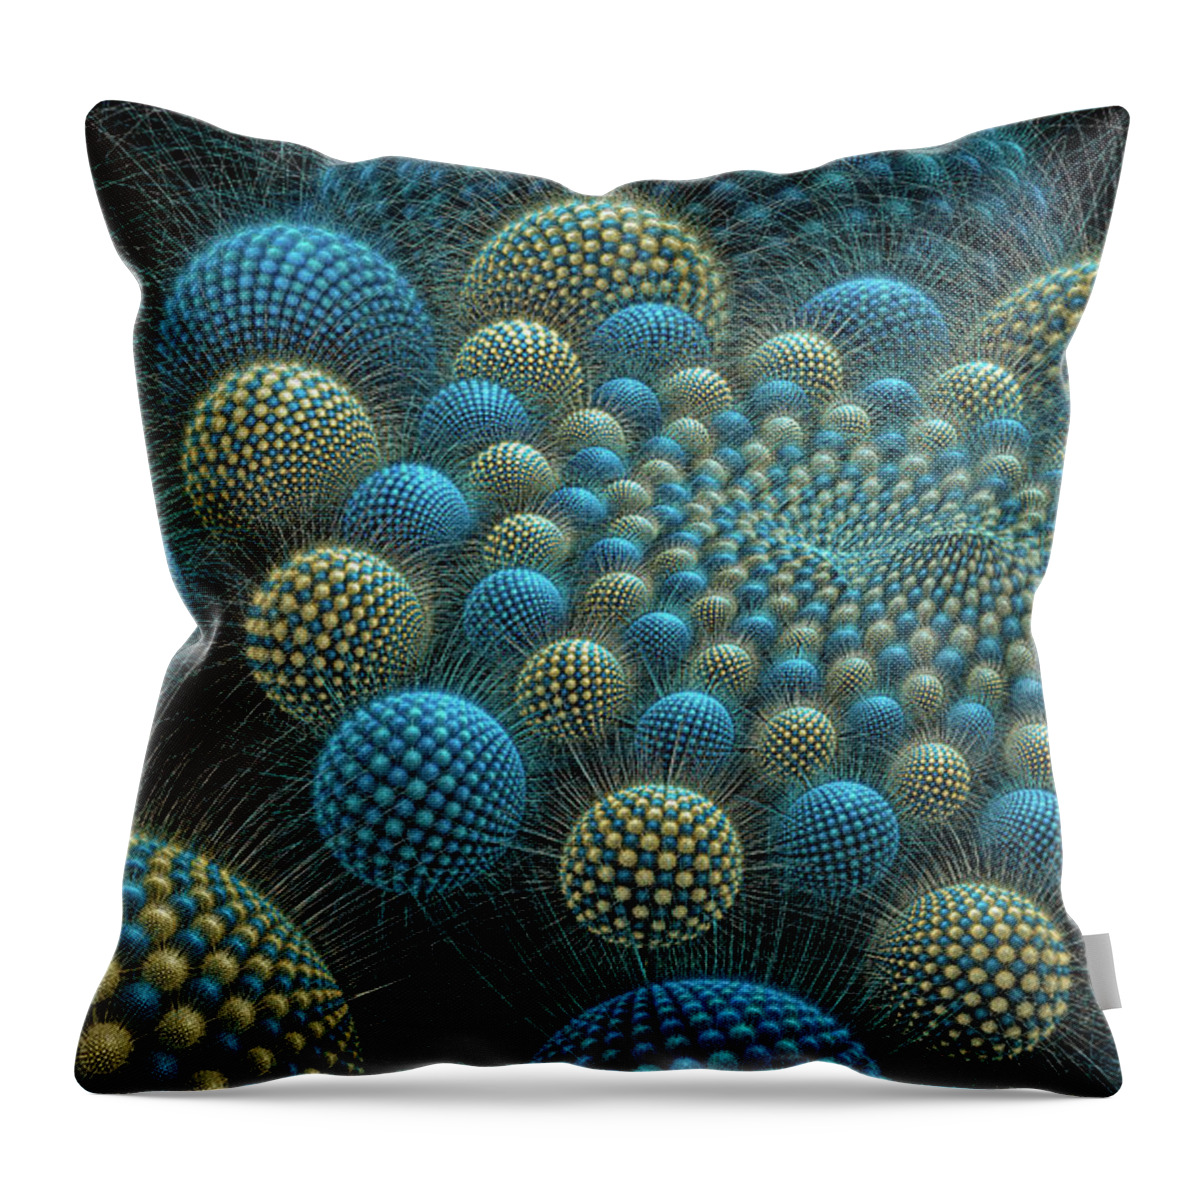  Throw Pillow featuring the digital art Job by Missy Gainer